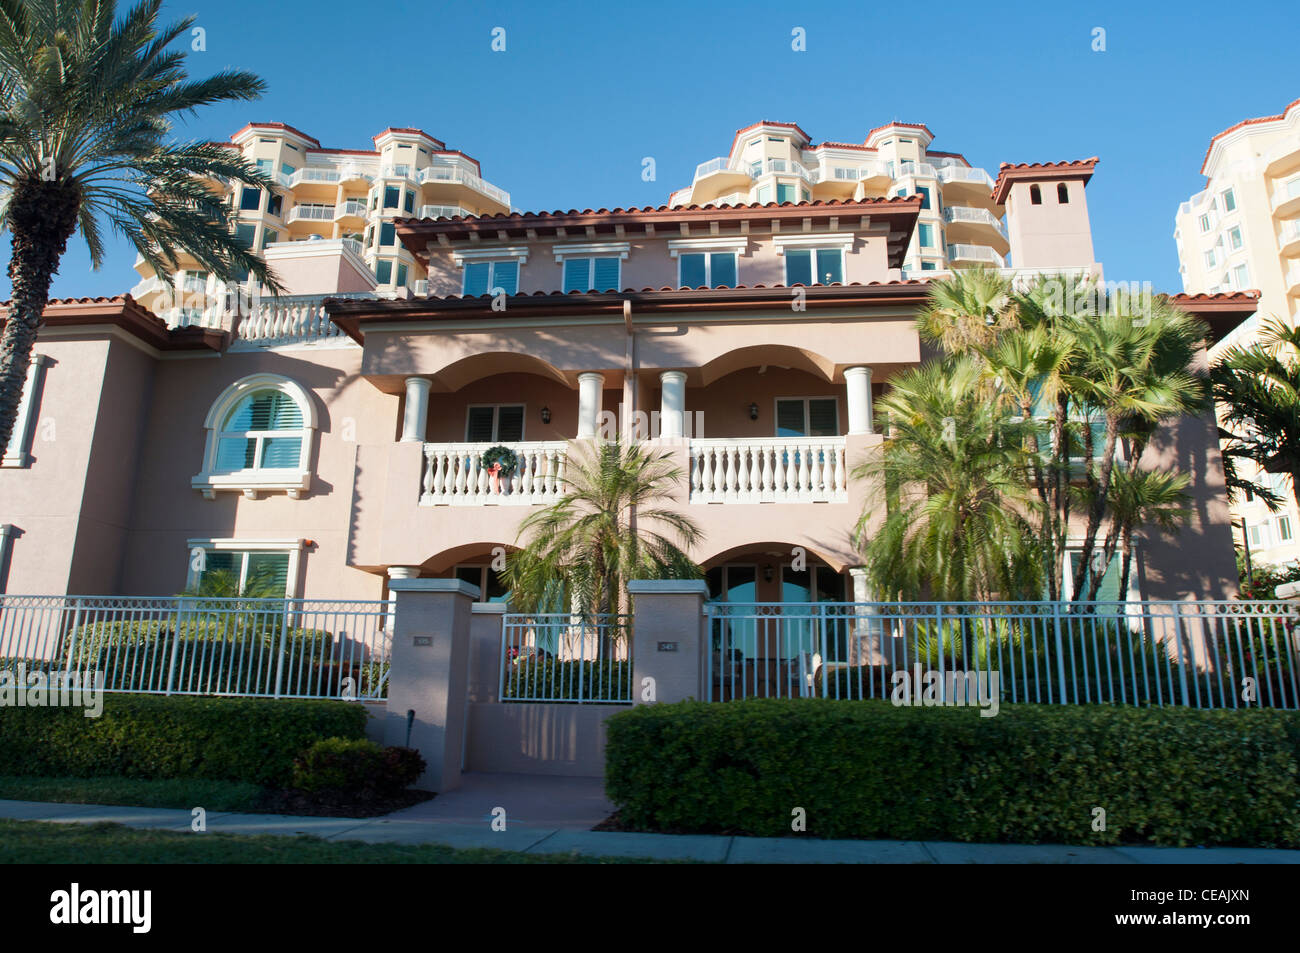 Waterfront expansive houses, St Petersburg, Florida, United States, USA Stock Photo